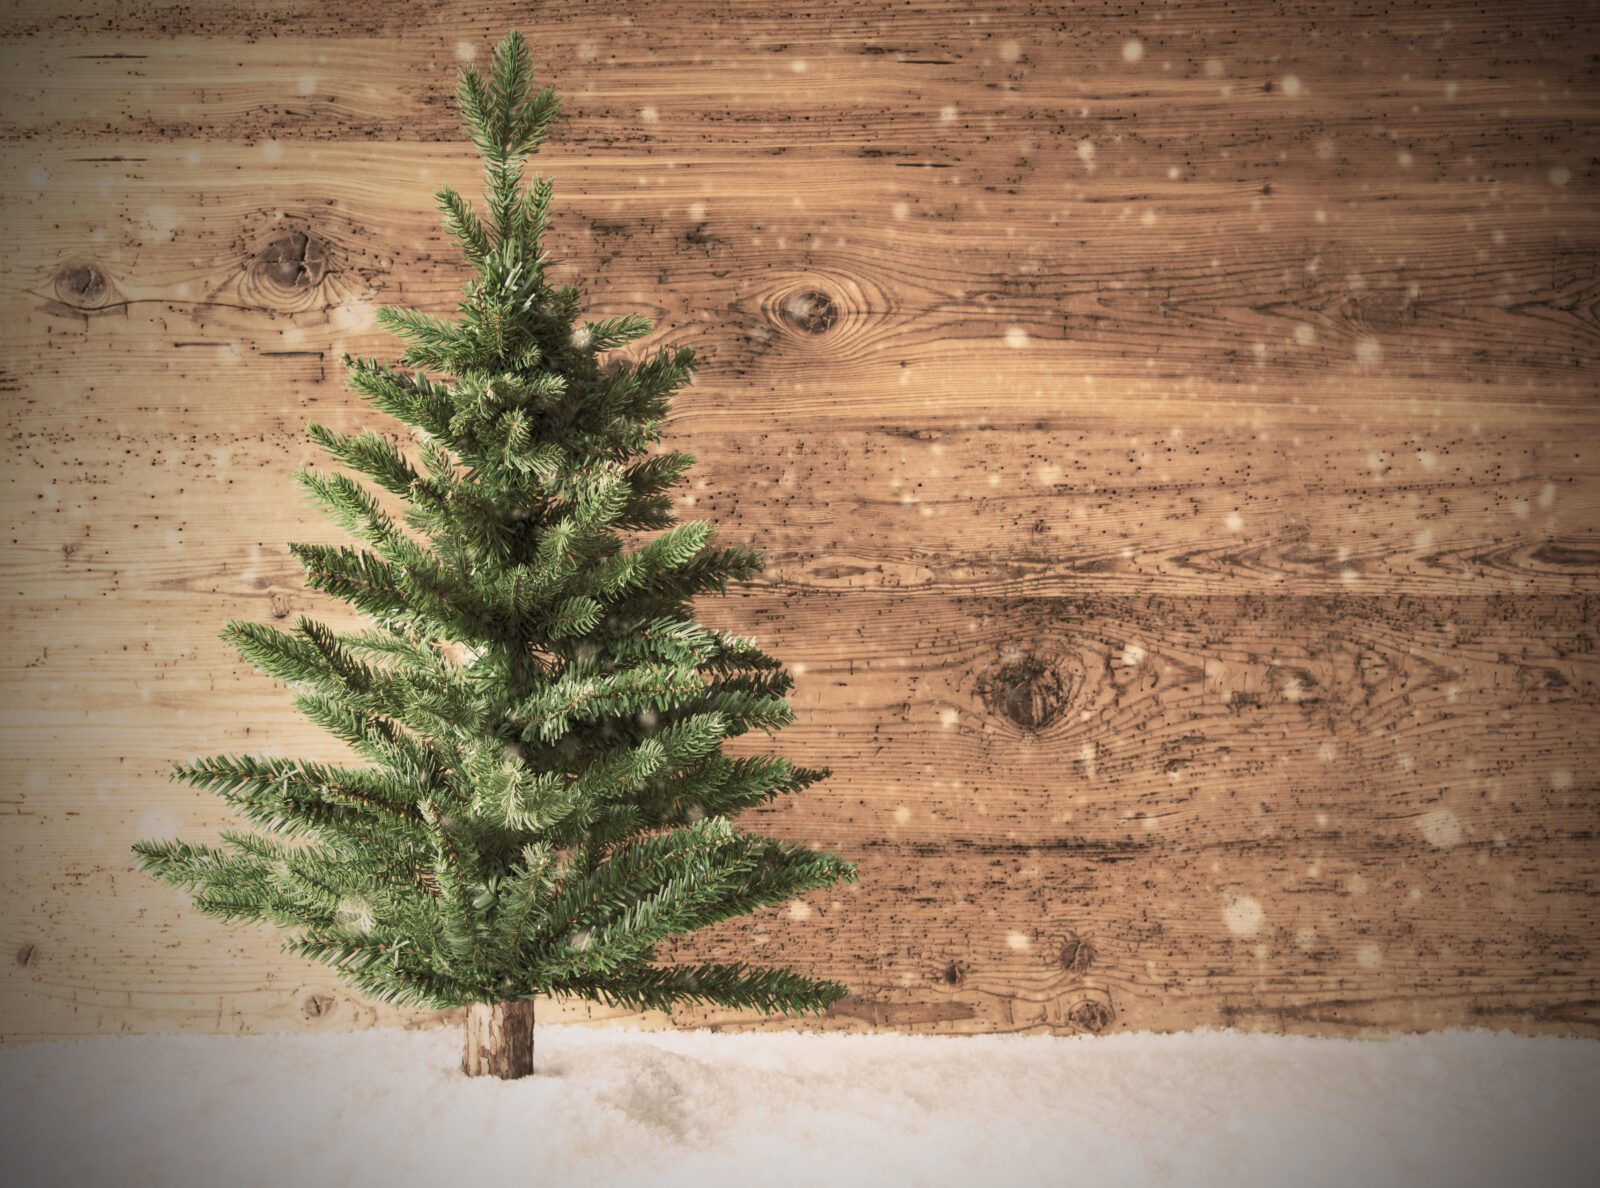 Retro Christmas Tree, Snow, Copy Space, Wooden Background